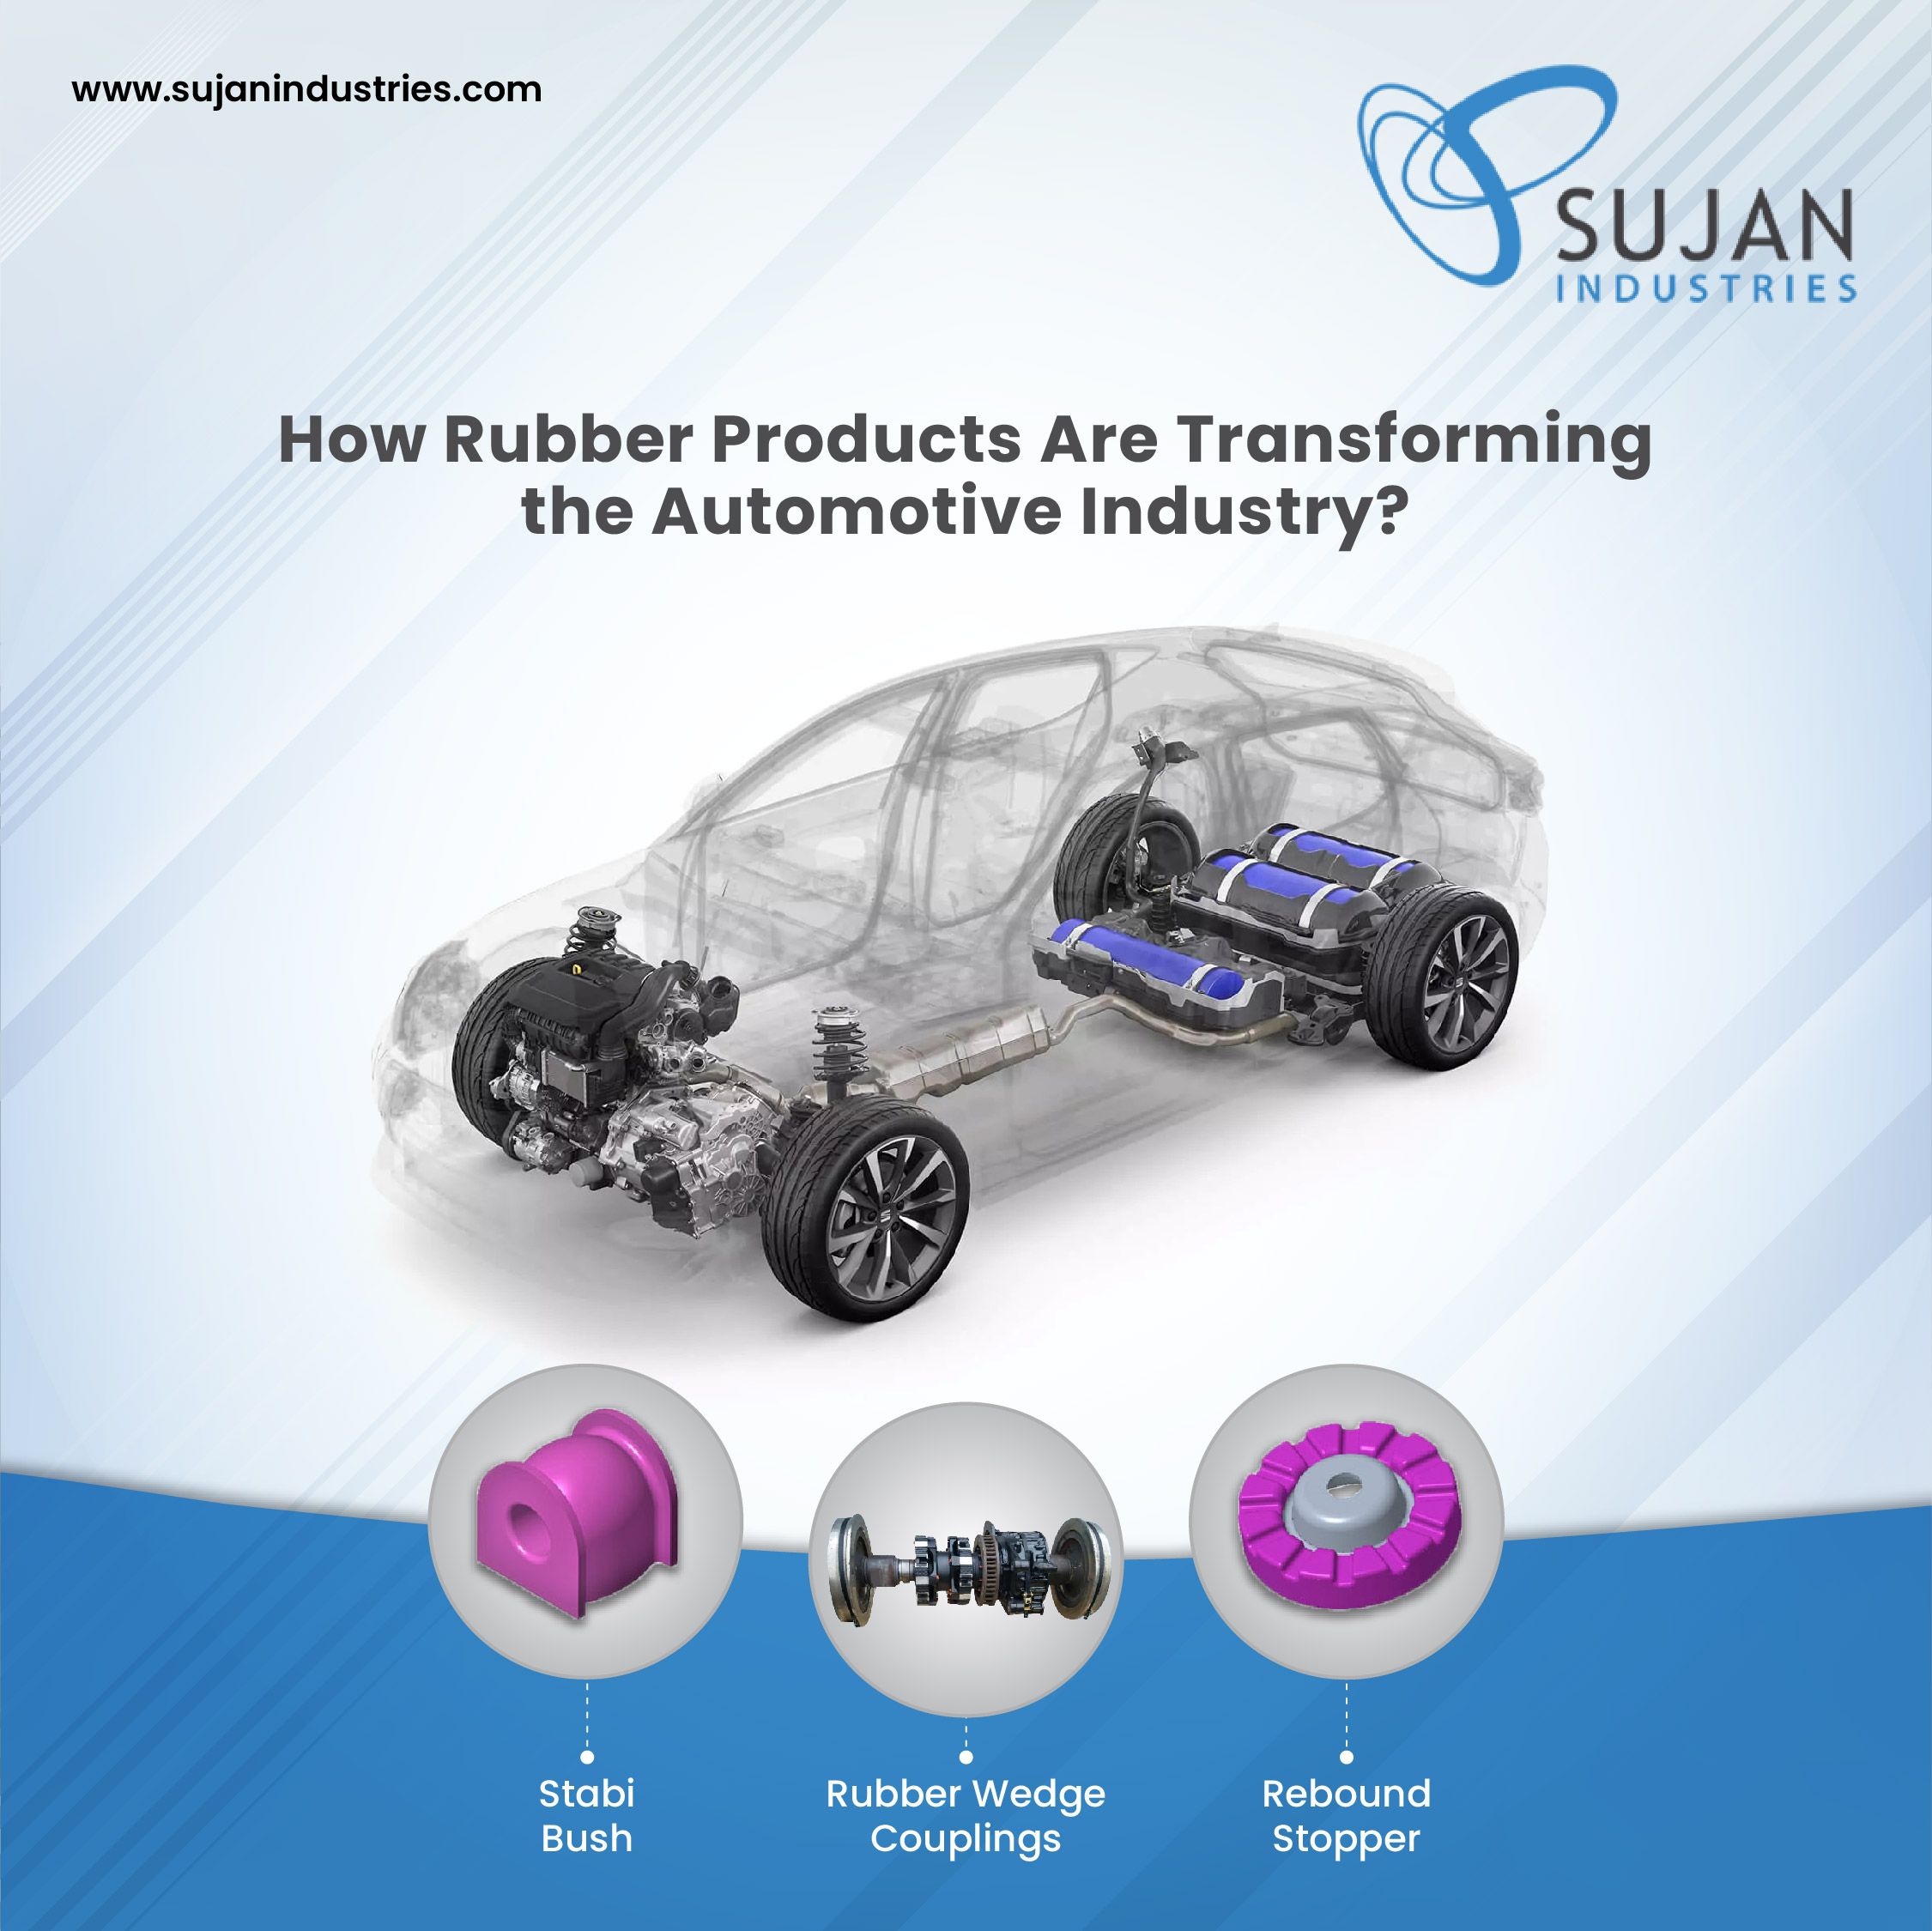 High Quality Rubber Materials & Products